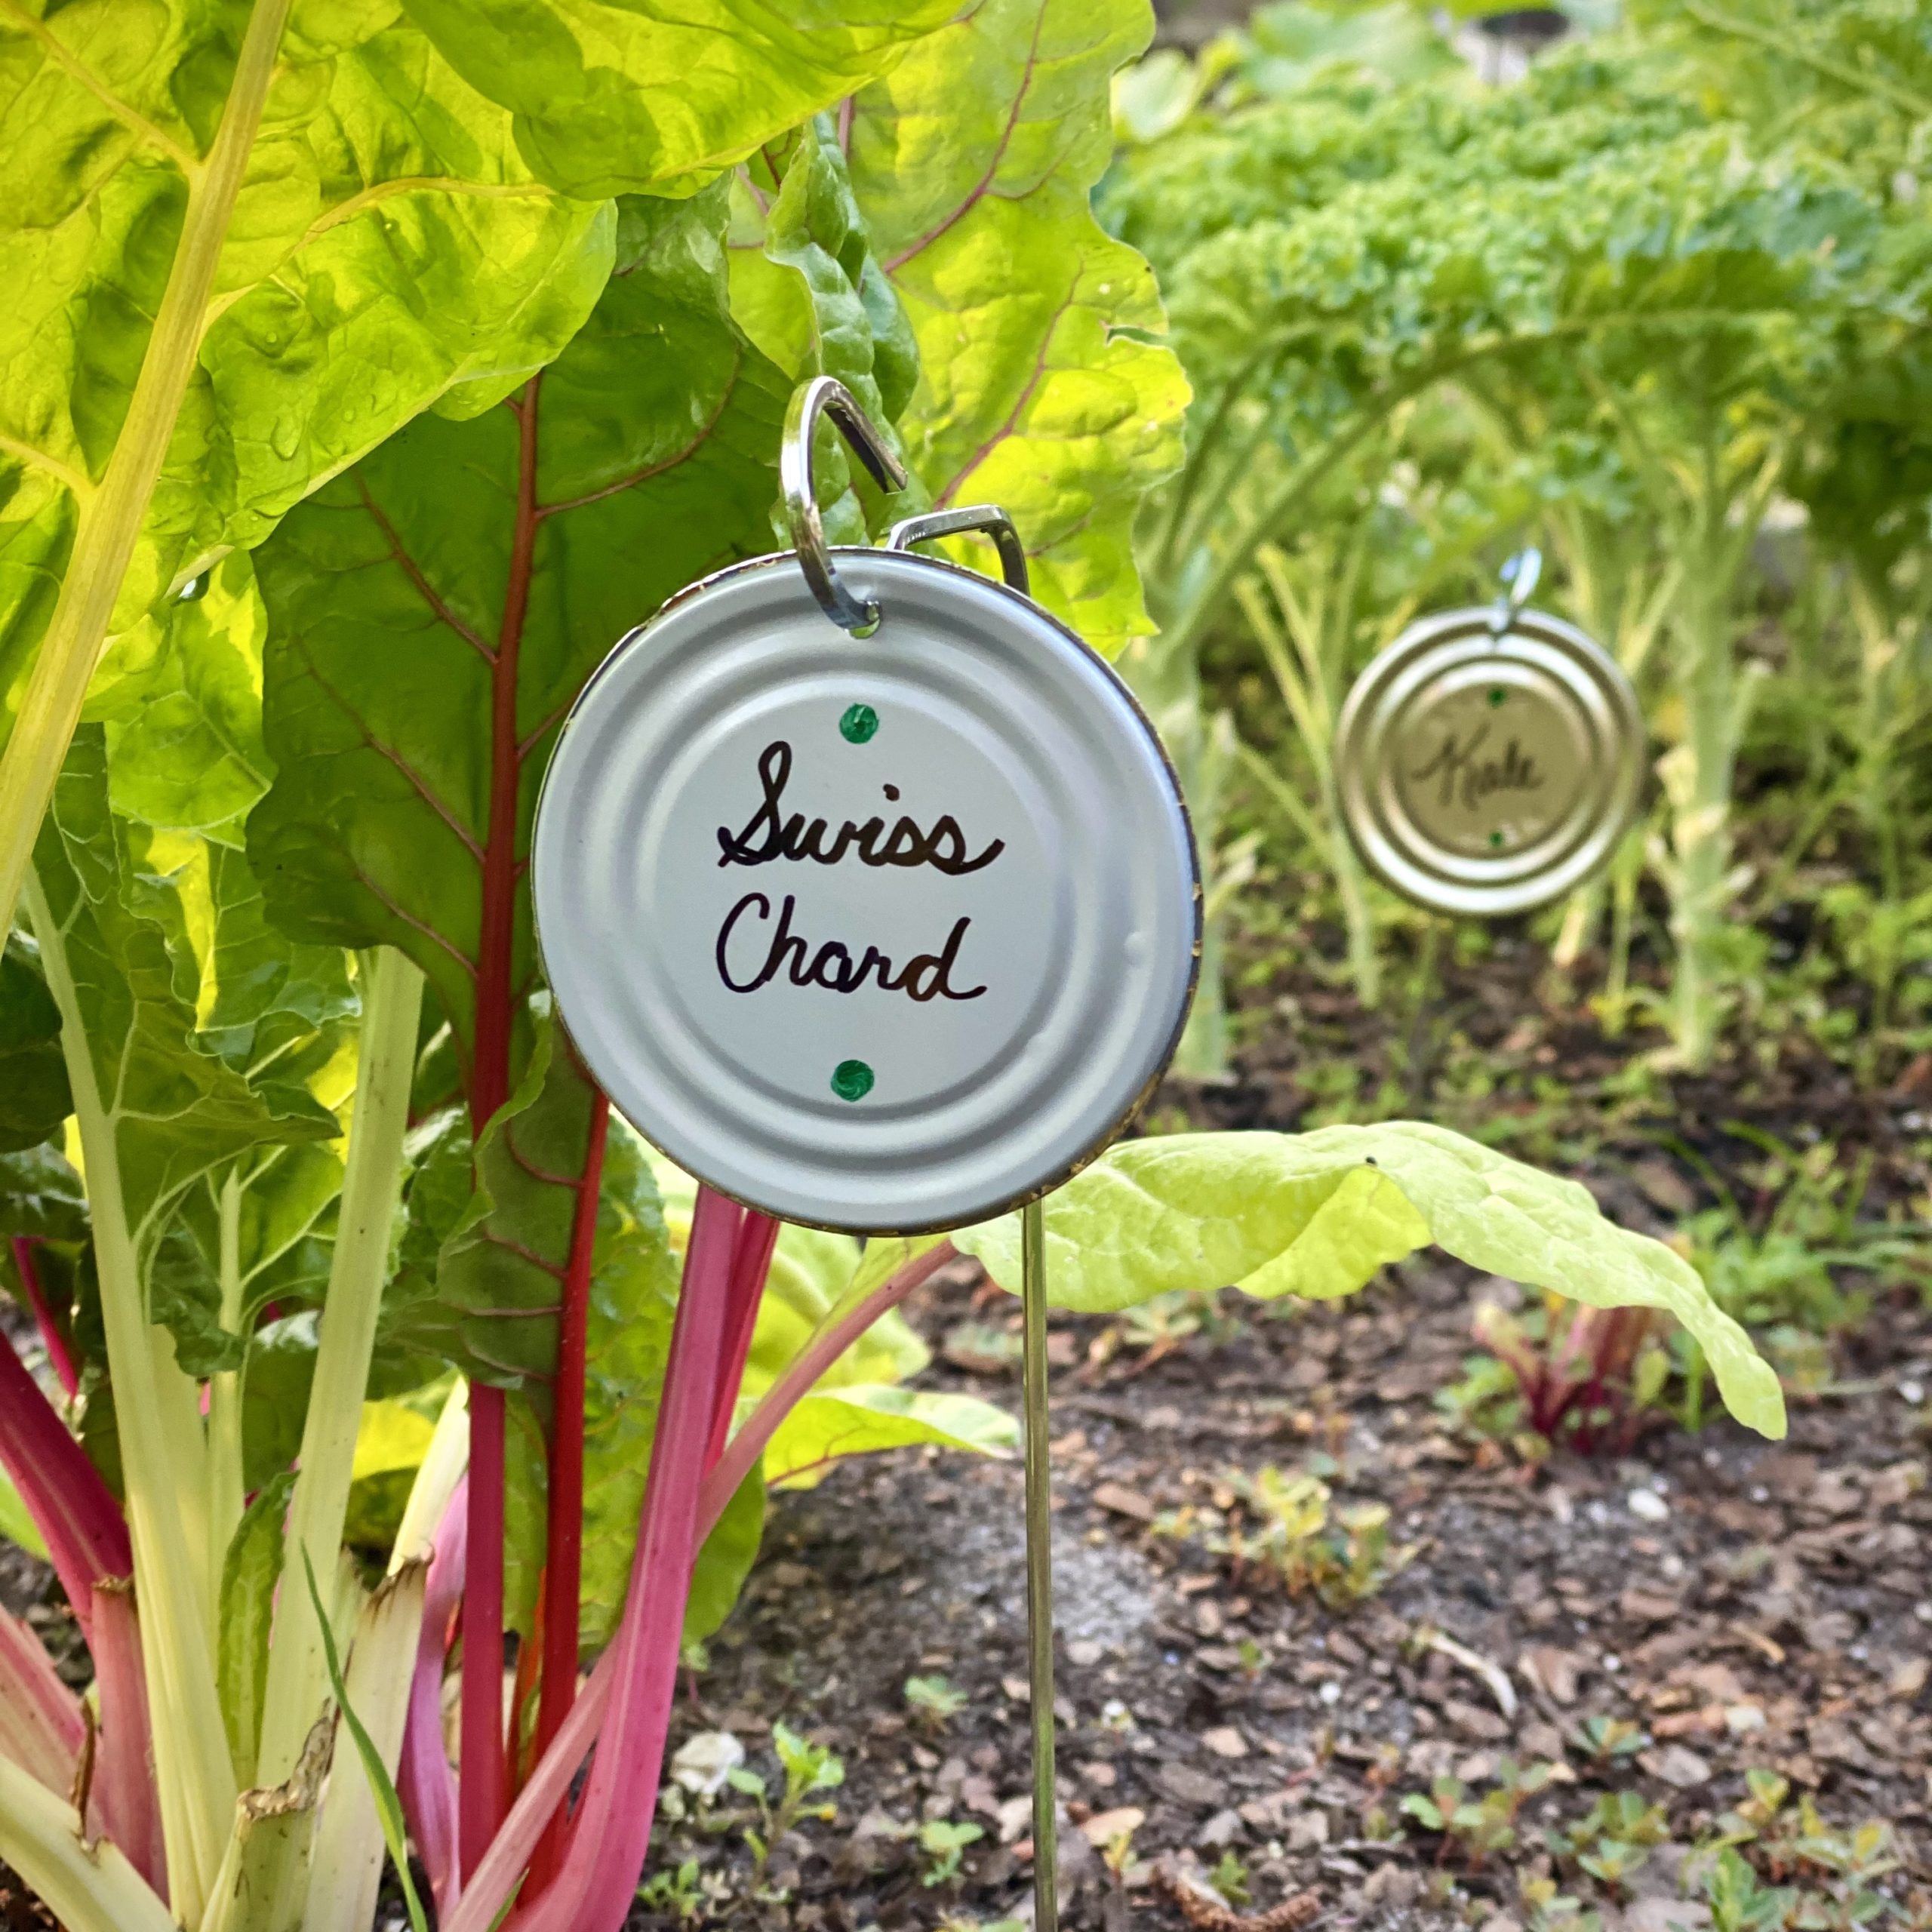 DIY garden marker with "Swiss chard" written on it next to a Swiss chard plant.